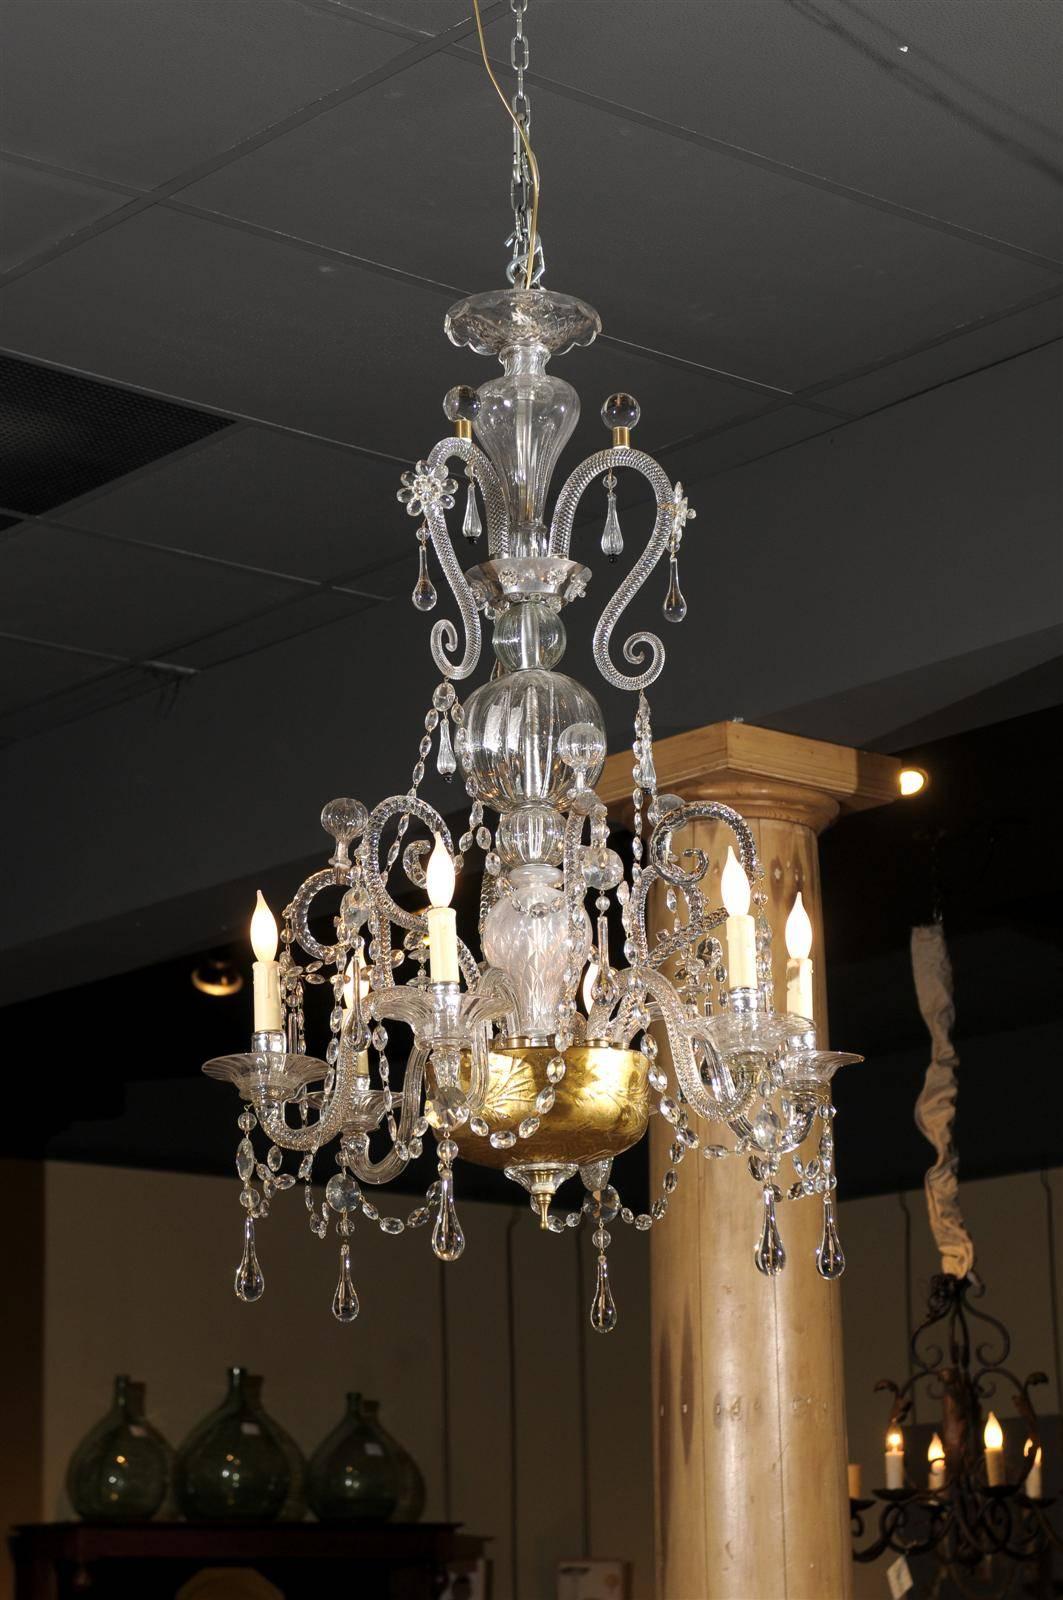 19th Century Six Light Venetian Chandelier, circa 1890
This magnificent chandelier is Venetian and has a very delicate form.  The under bowl is lined with a gold paint and is etched on the exterior.  This is a favorite style of the Venetian